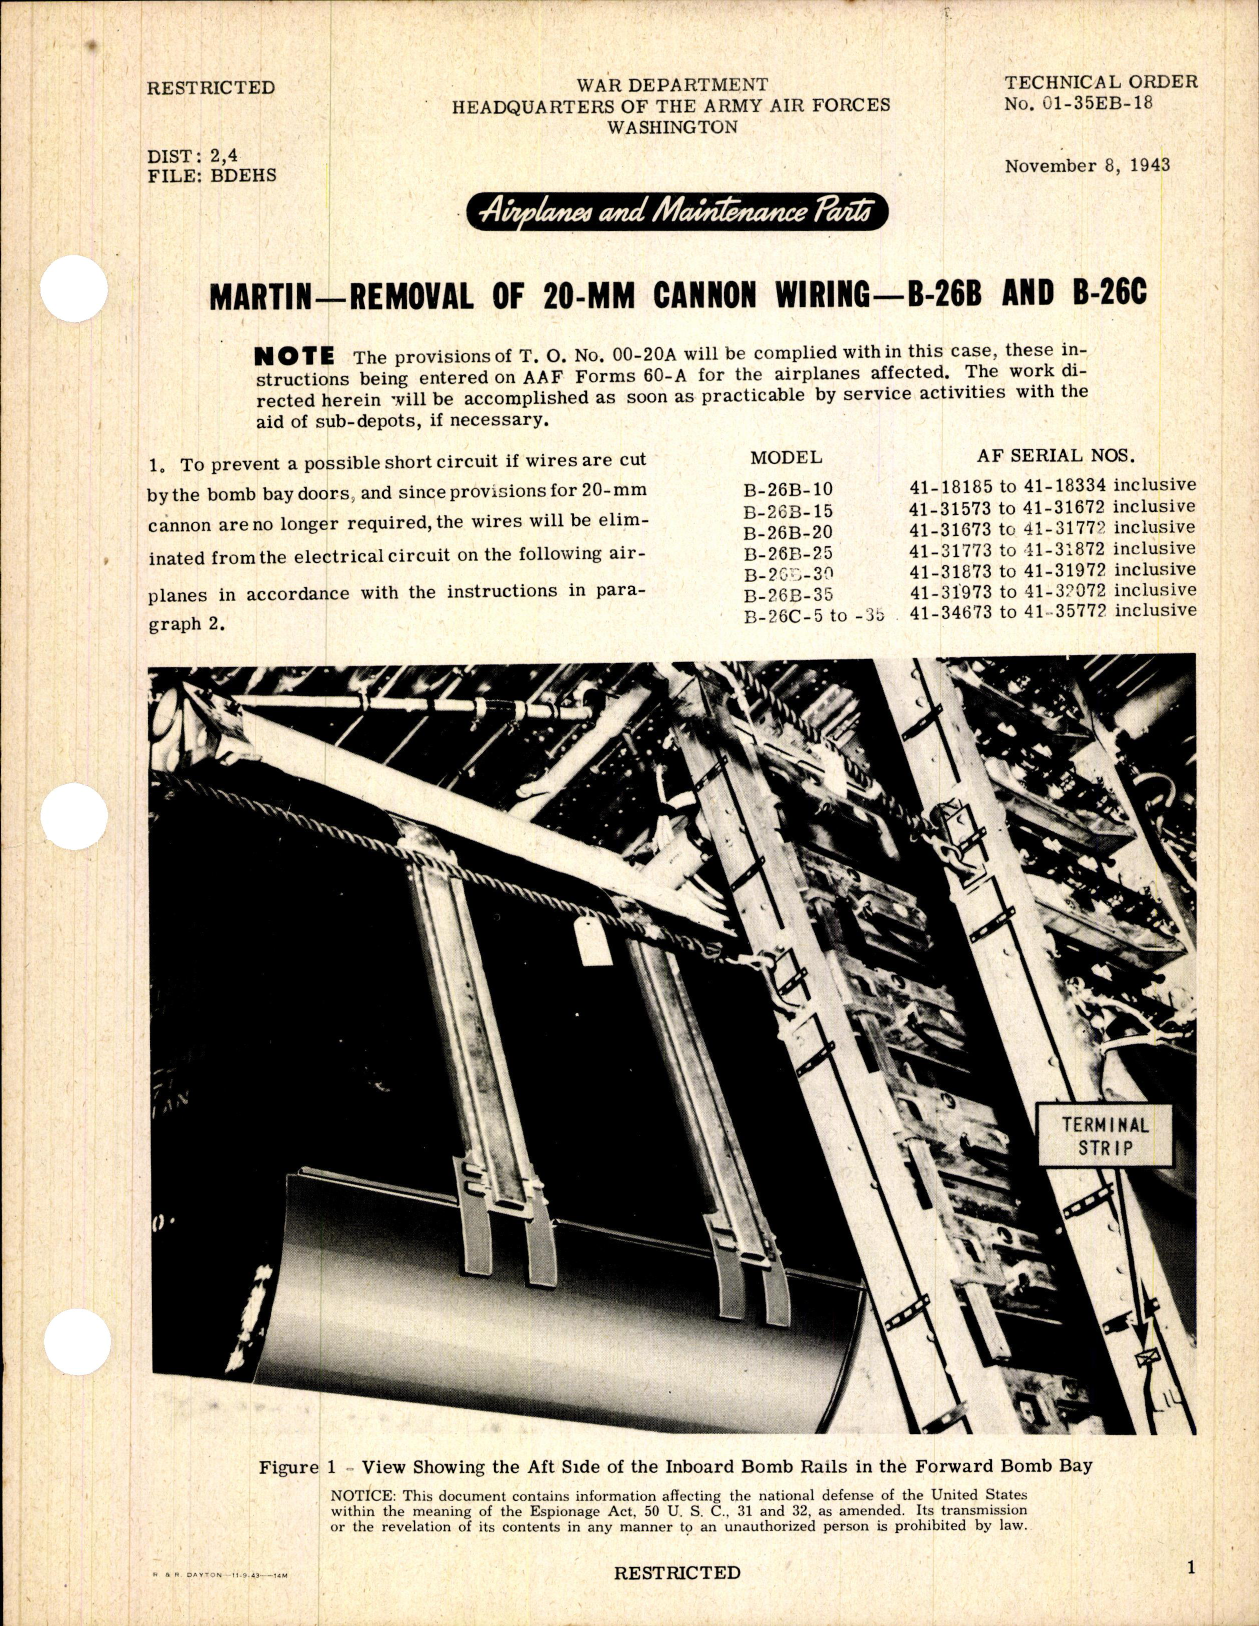 Sample page 1 from AirCorps Library document: Removal of 20-MM Cannon Wiring for B-26B and B-26C